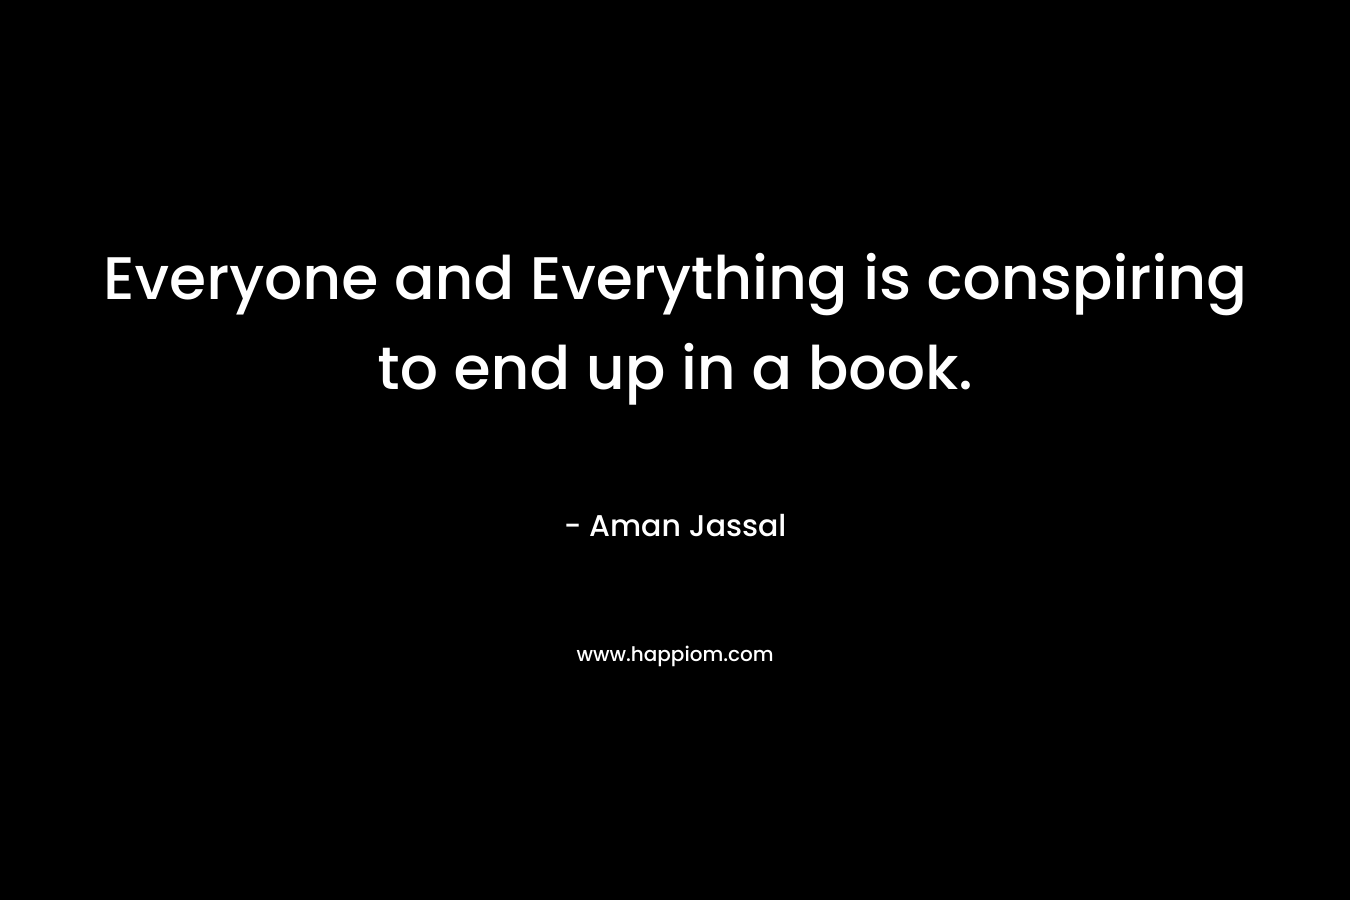 Everyone and Everything is conspiring to end up in a book.